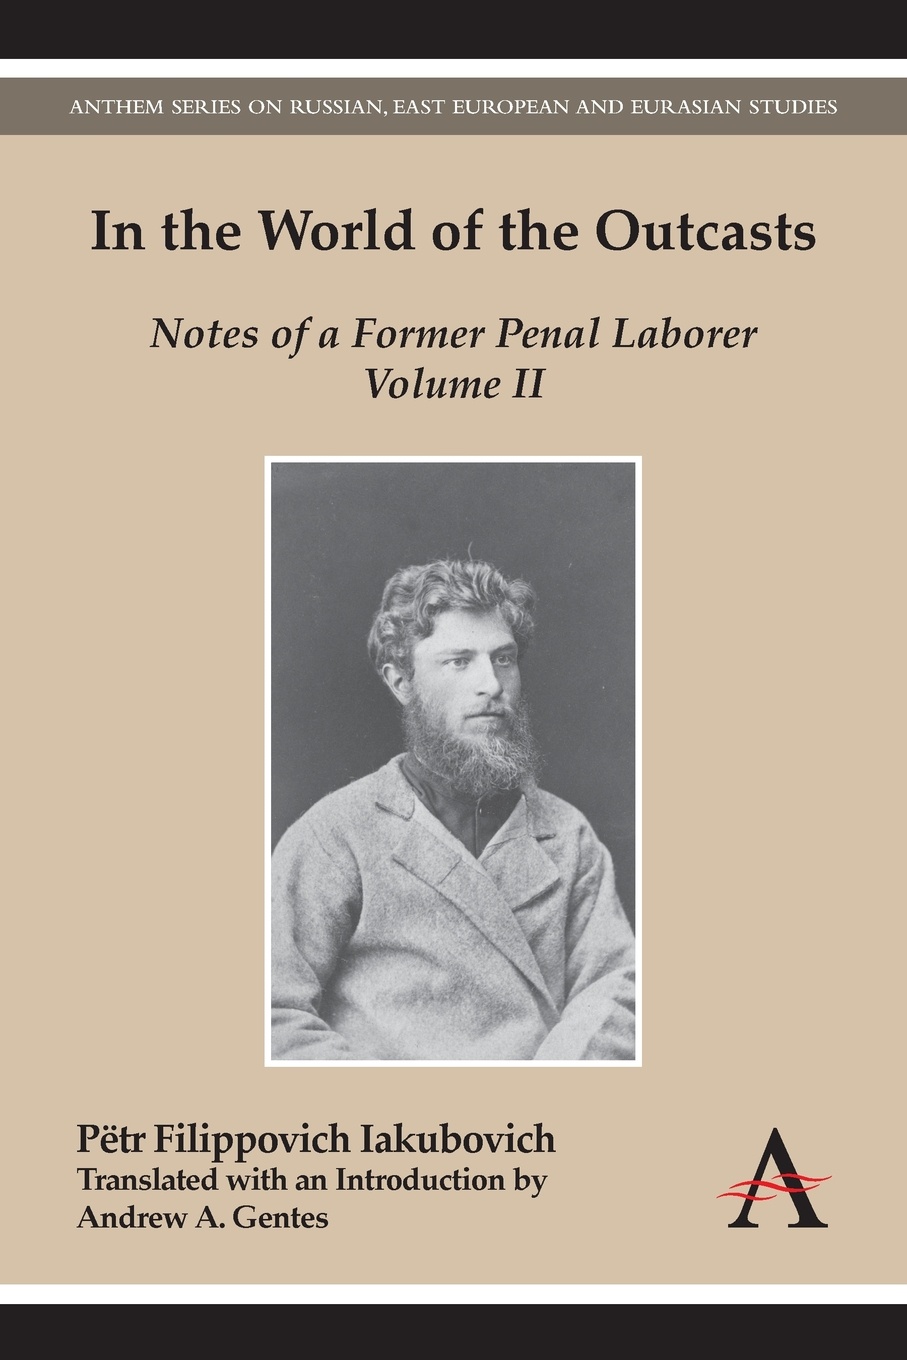 In the World of the Outcasts. Volume II: Notes of a Former Penal Laborer